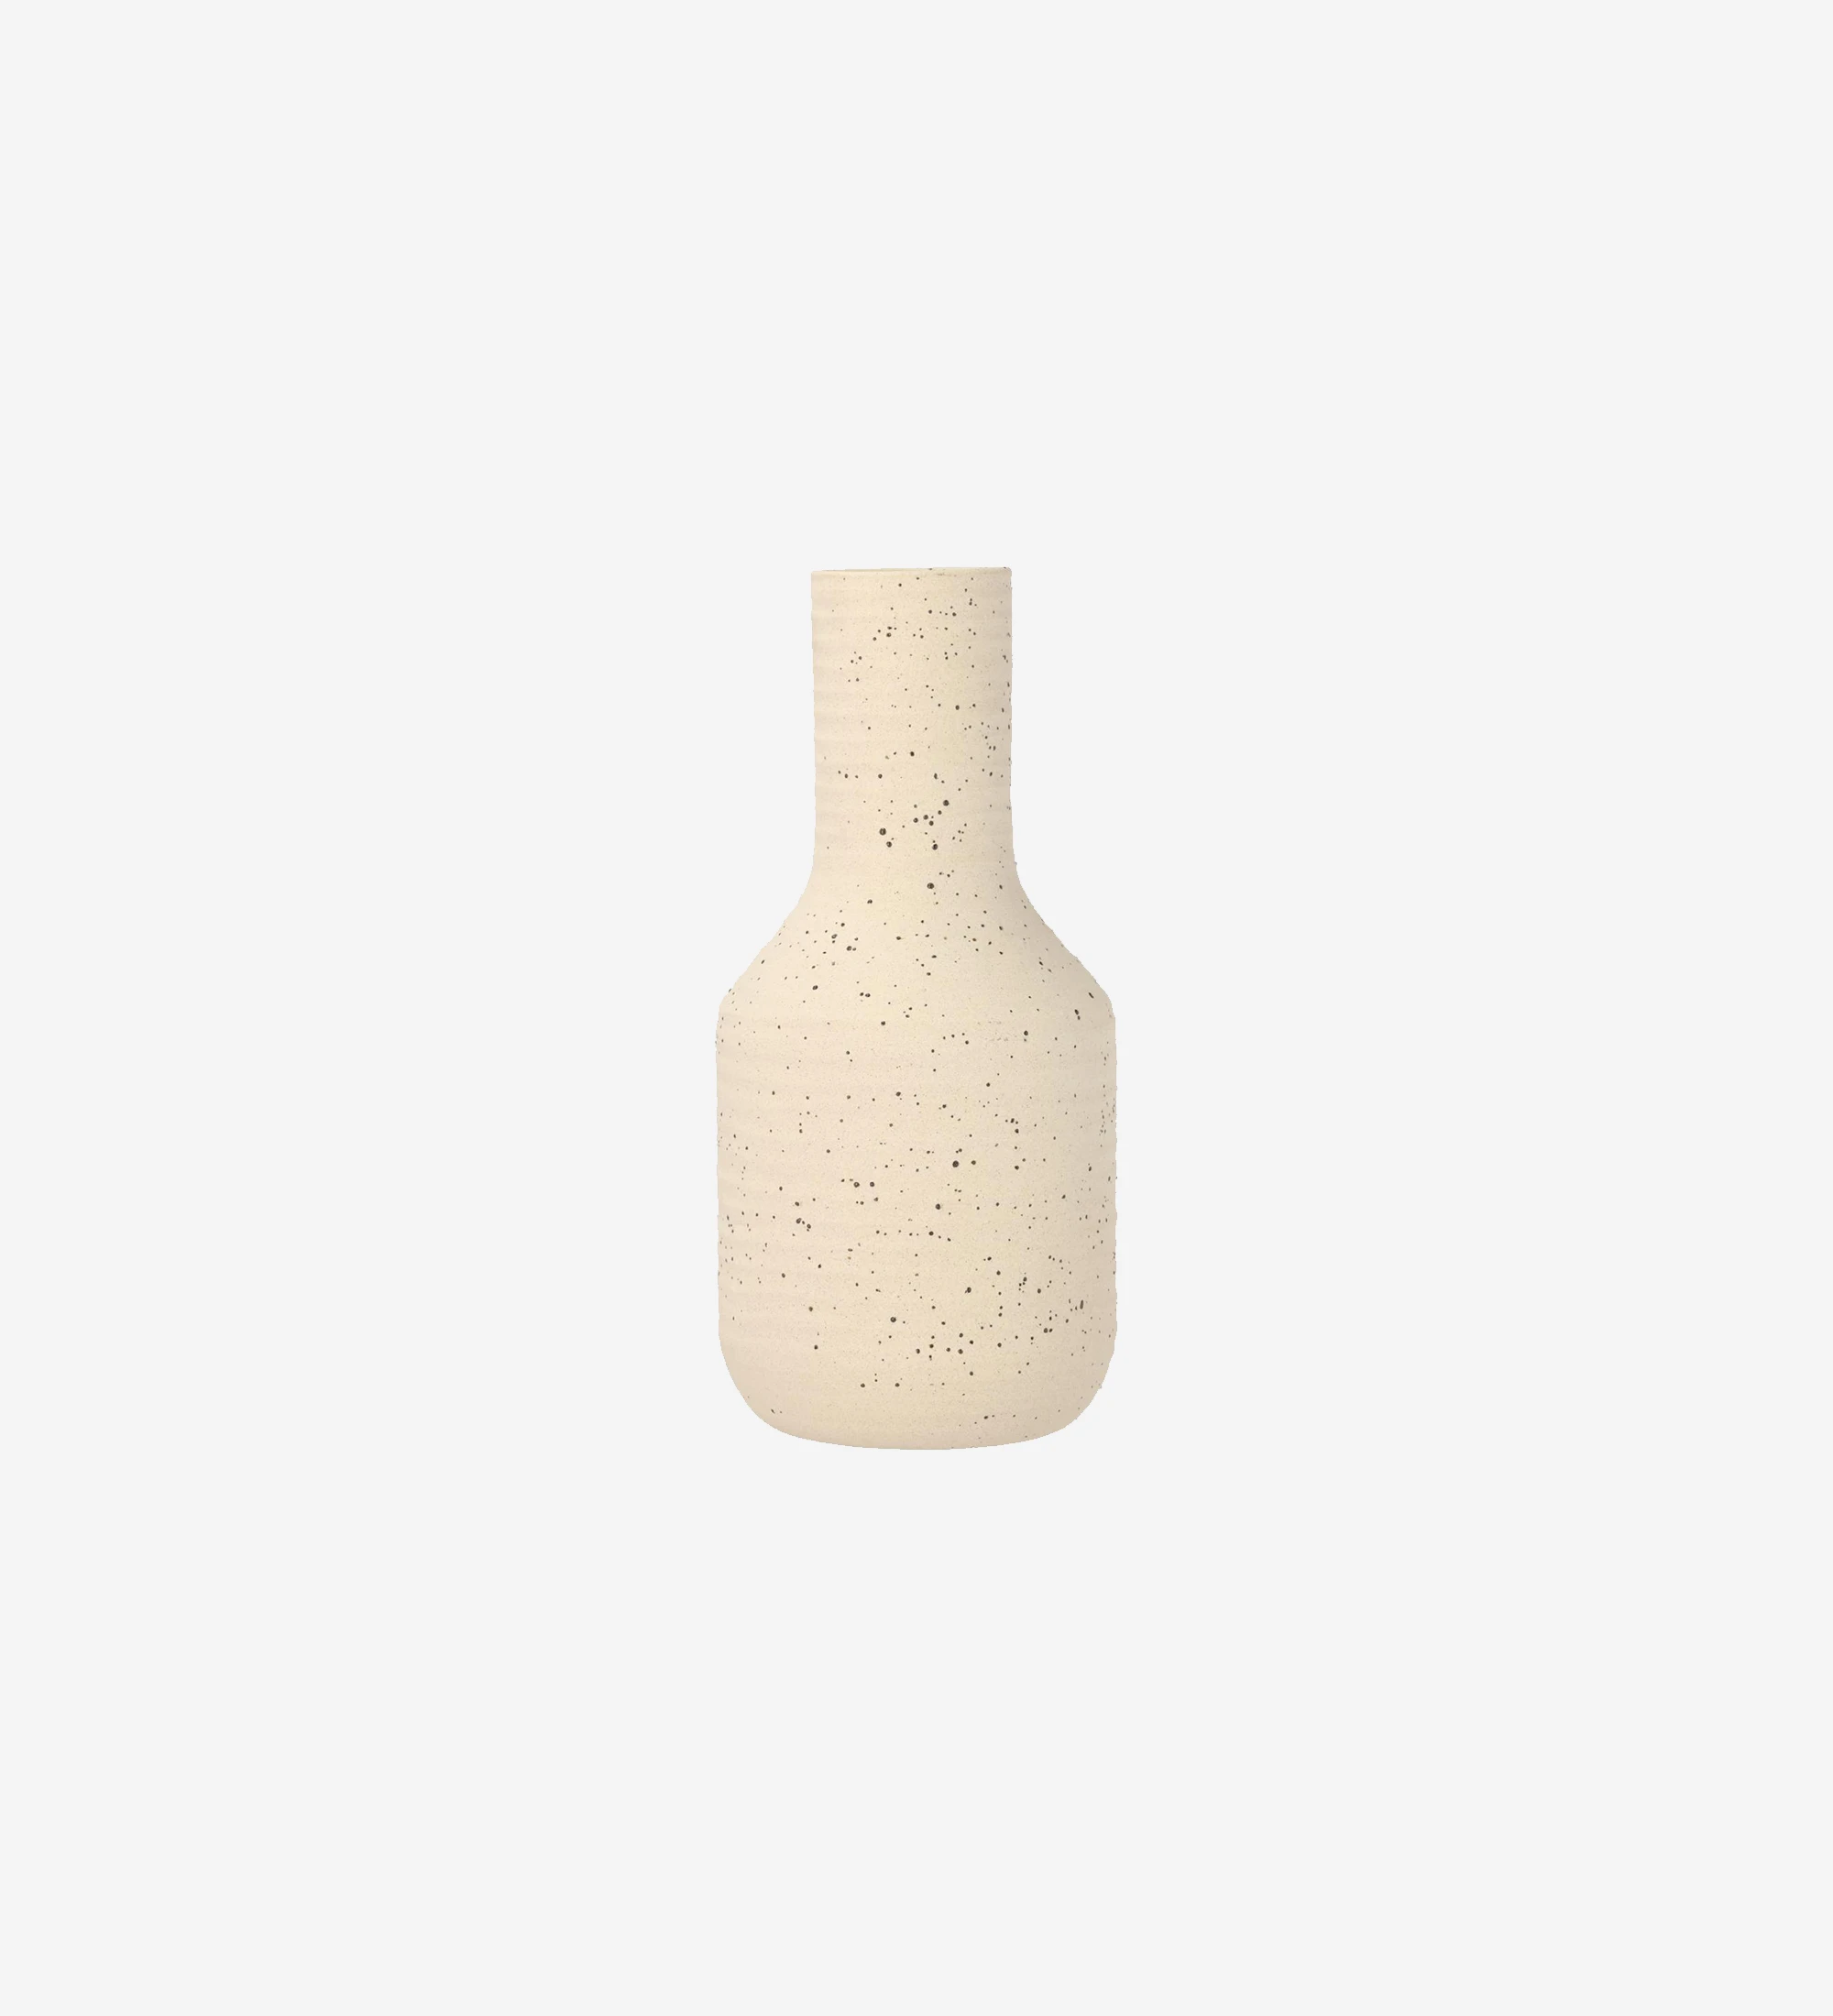 Vase in off-white stoneware with small black dots.